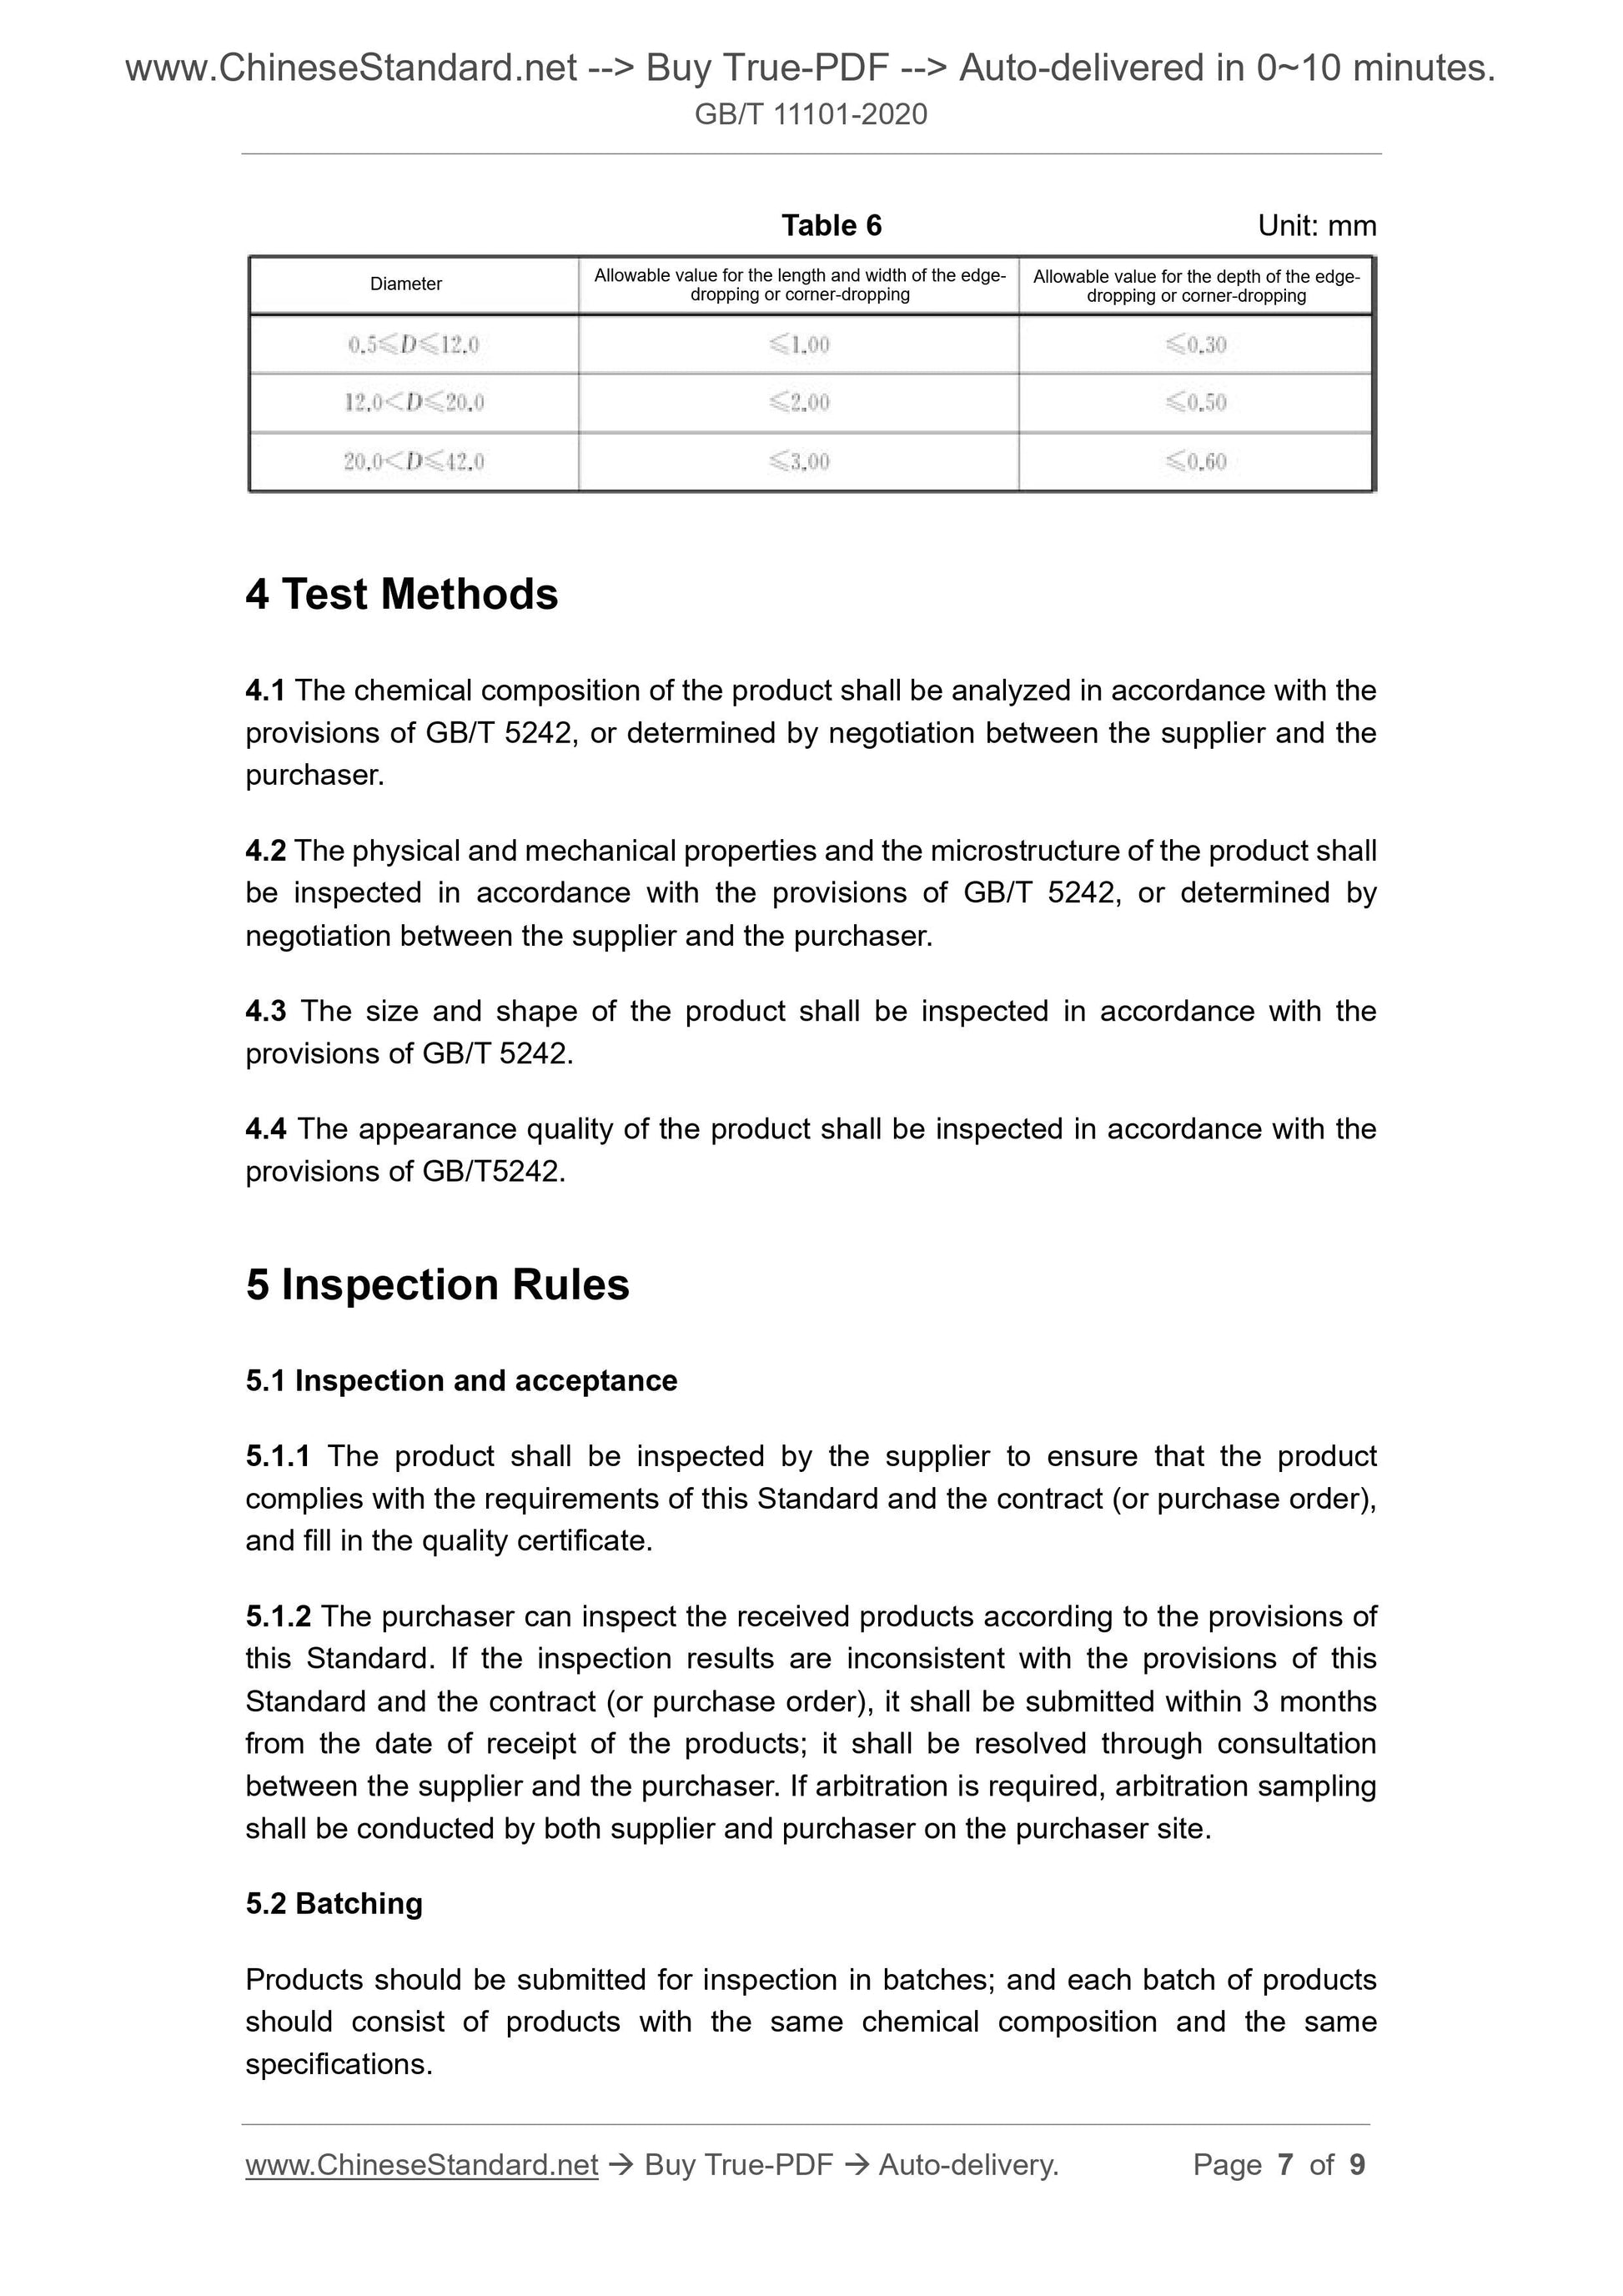 GB/T 11101-2020 Page 5